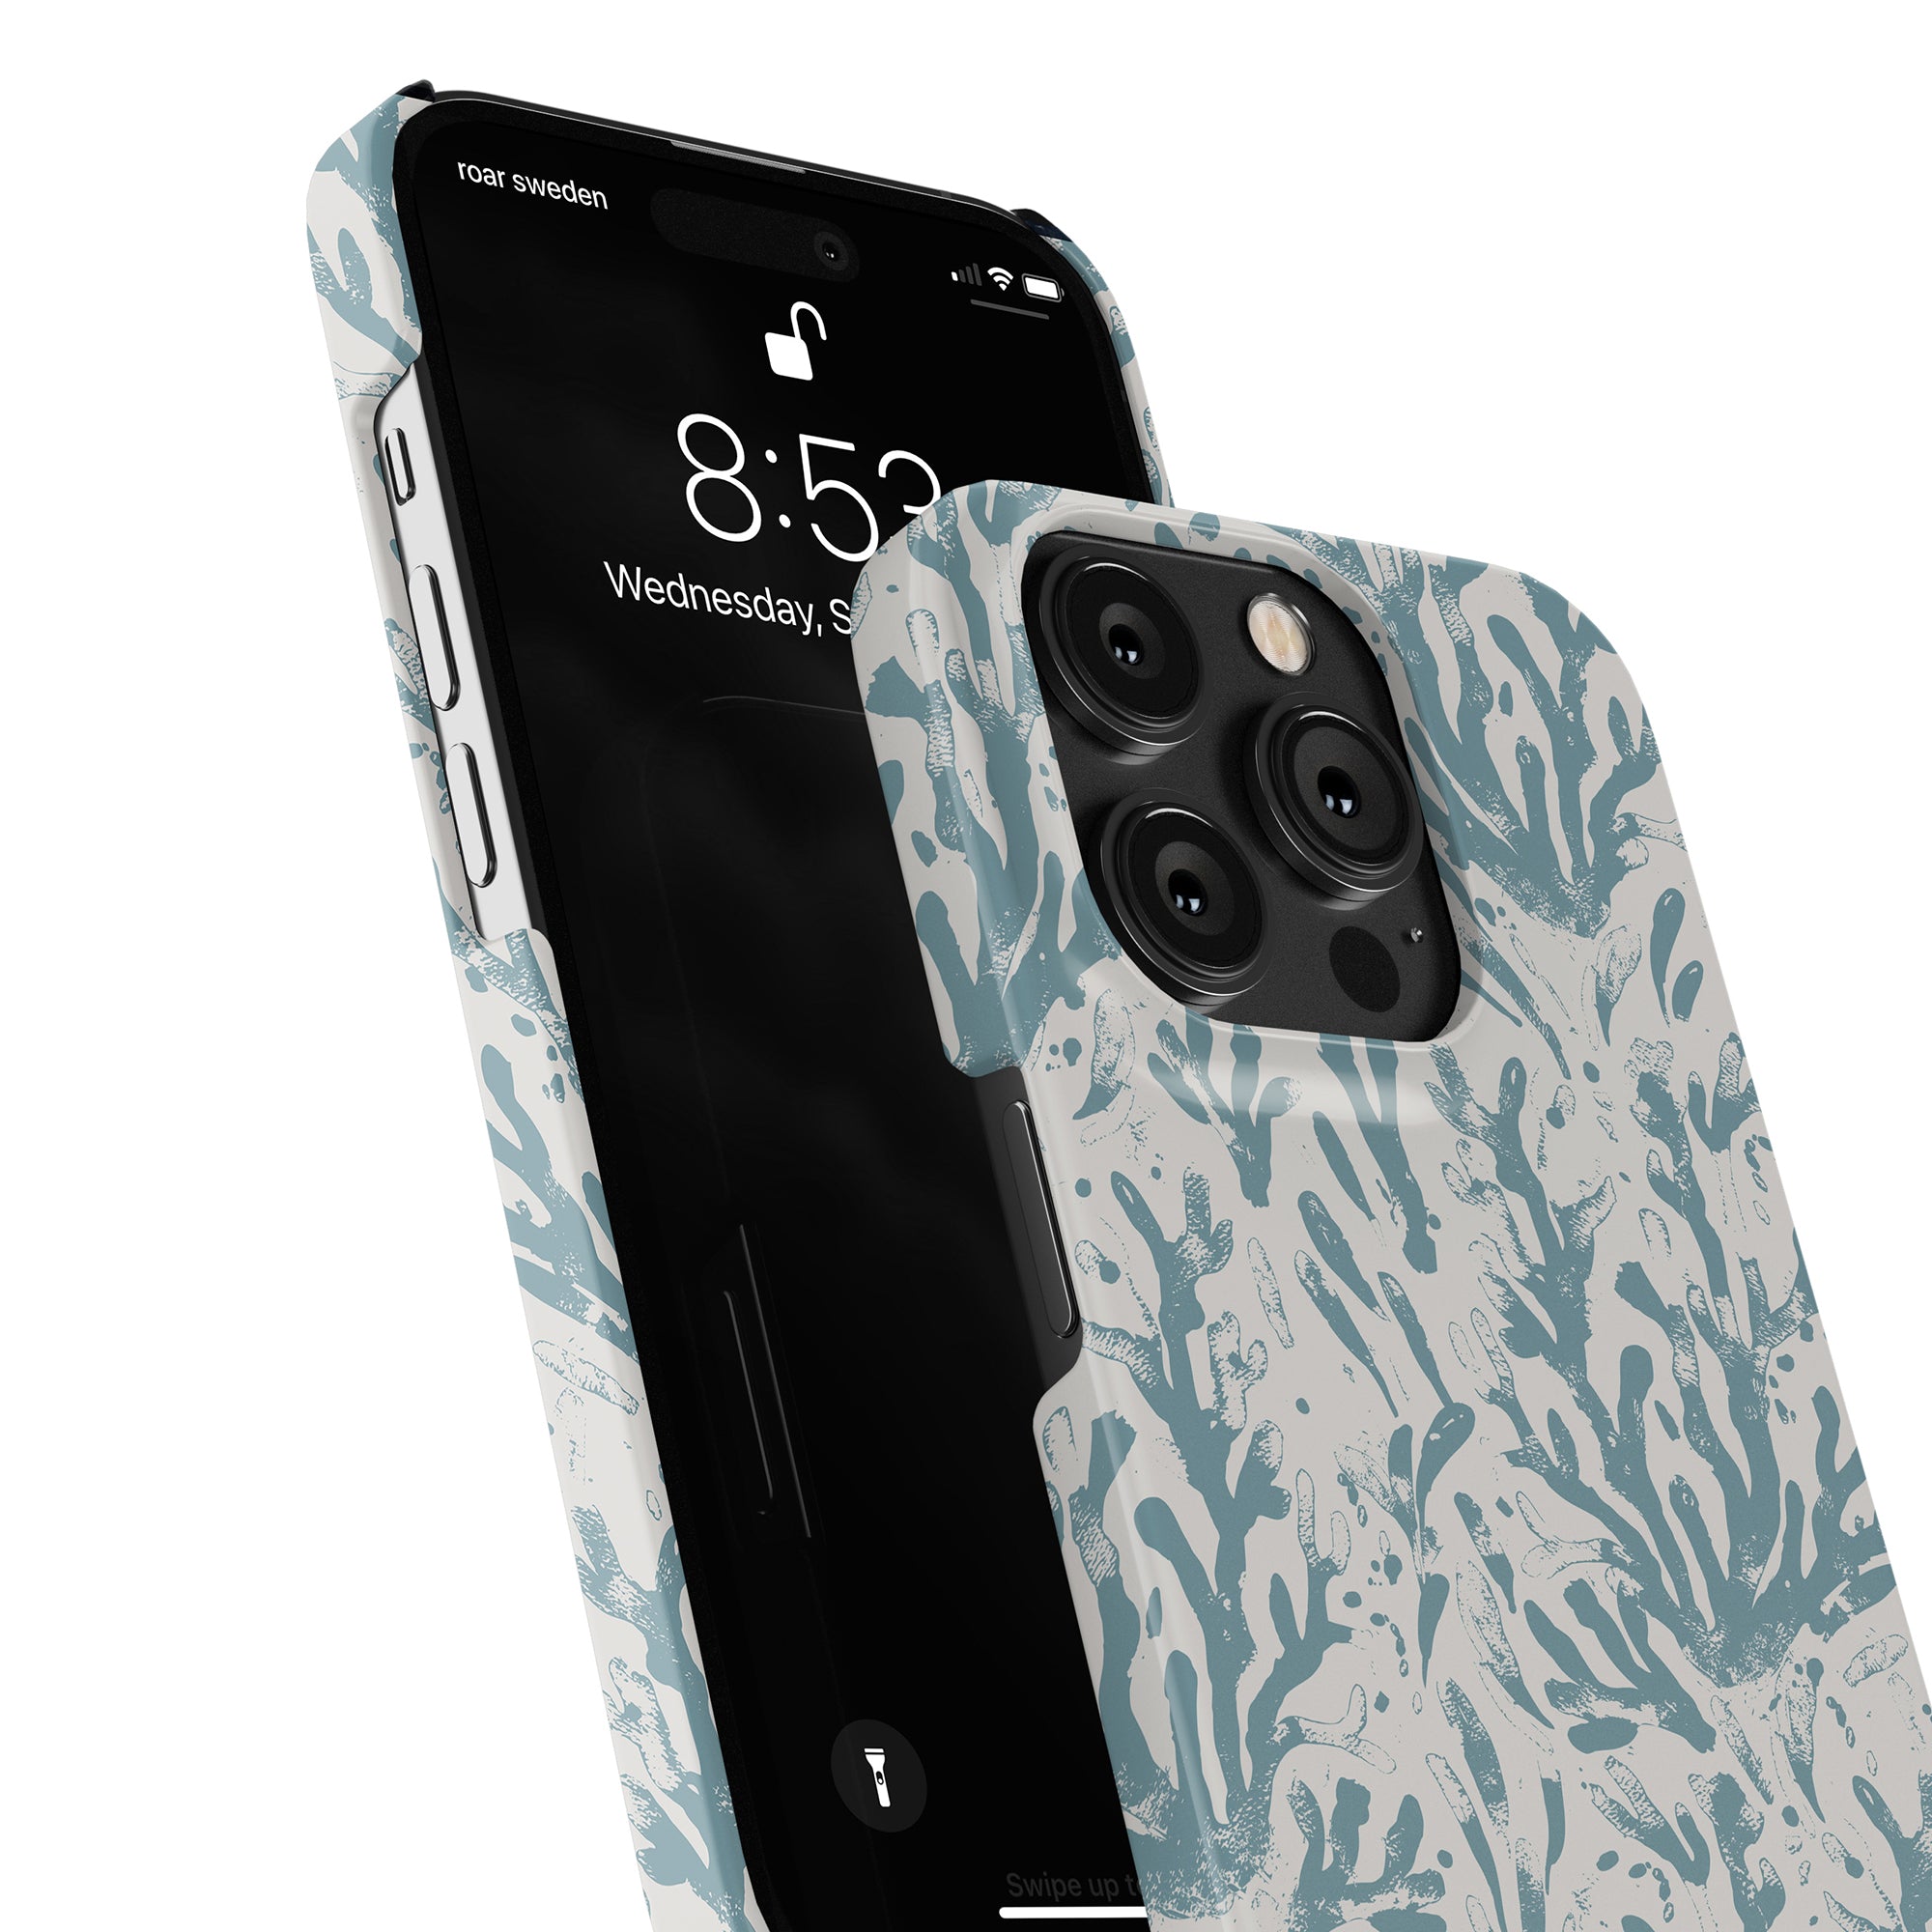 Two Sea Life - Slim cases with a blue and white pattern, one showcasing the front screen and the other the rear camera setup, alongside stylish sunglasses with UV protection.